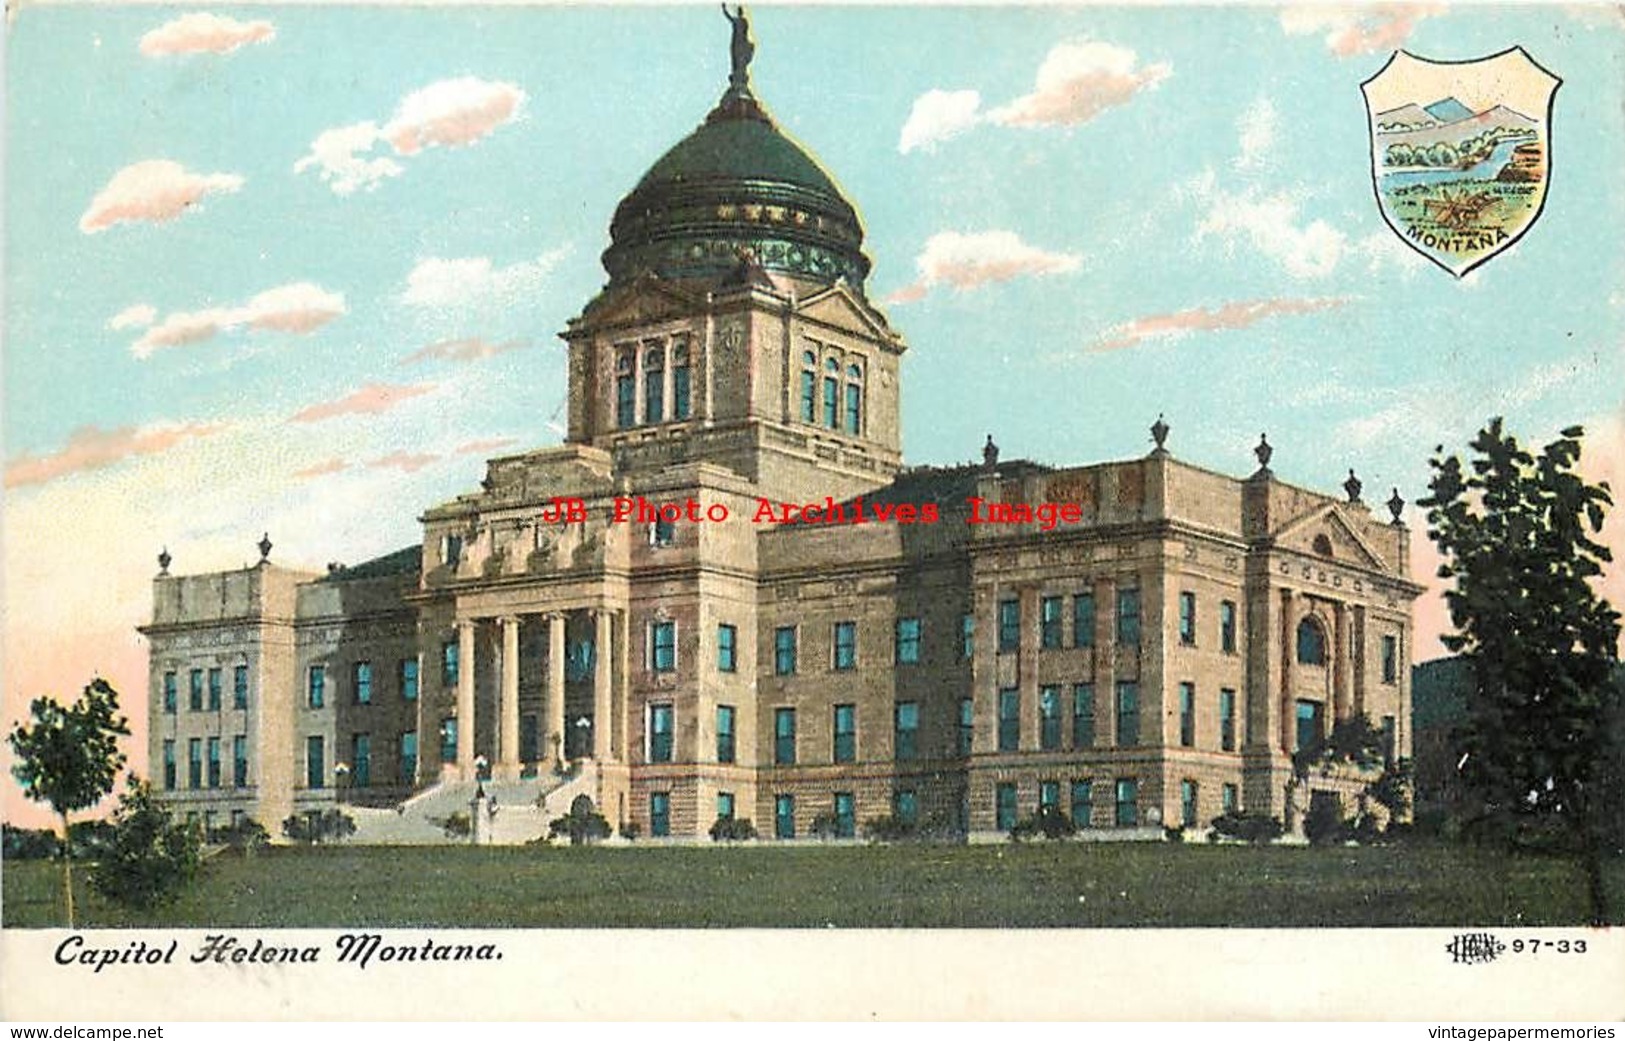 281411-Montana, Helena, State Capitol Building, Illustrated Postal Card Co No 97-33 - Helena